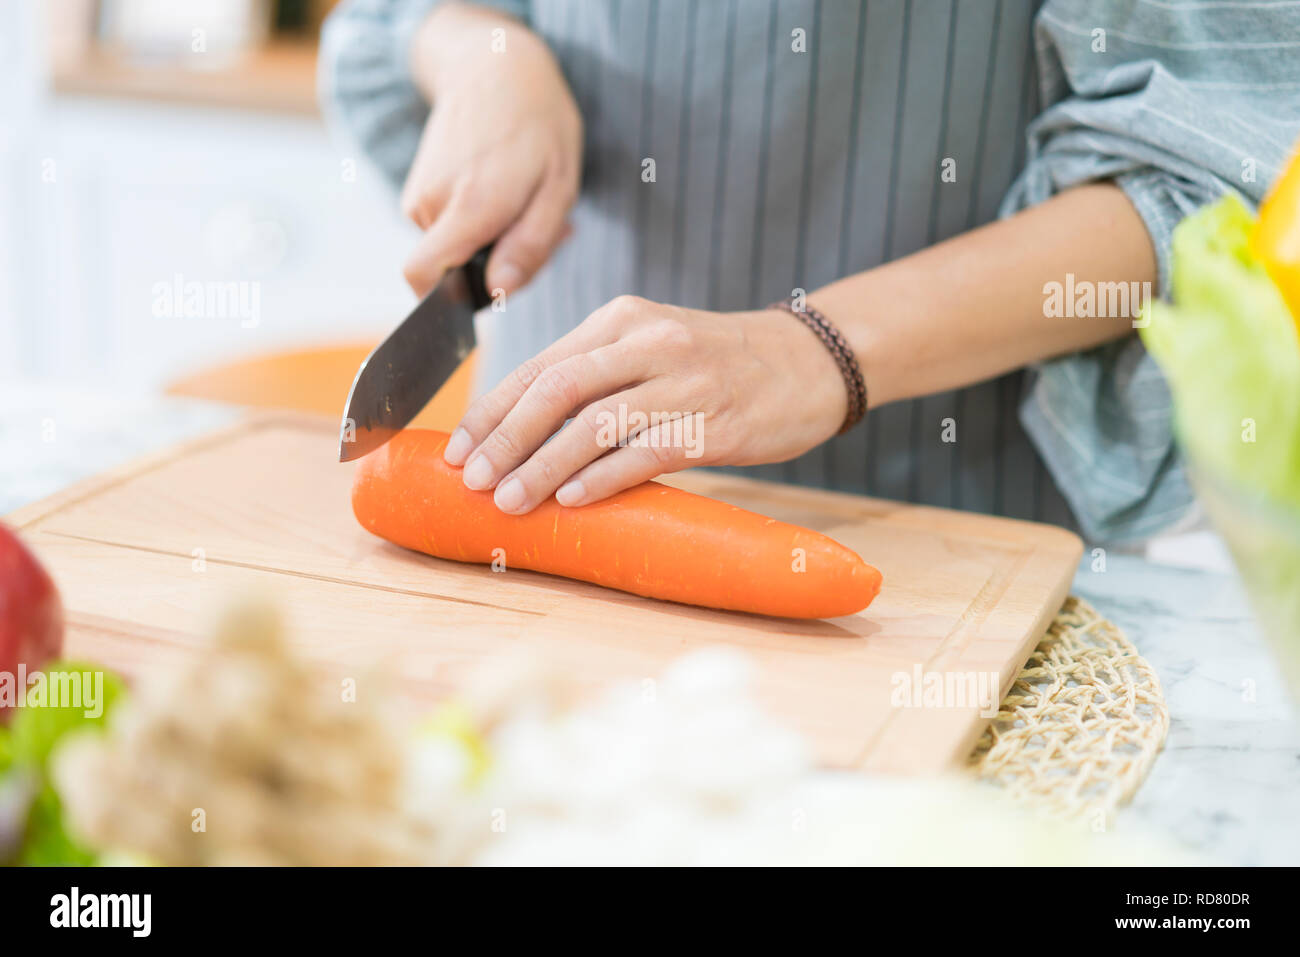 Hand with knife cutting carrot. Woman prepares food at table. Chef cooks delicious dinner. Work that requires skill. Stock Photo